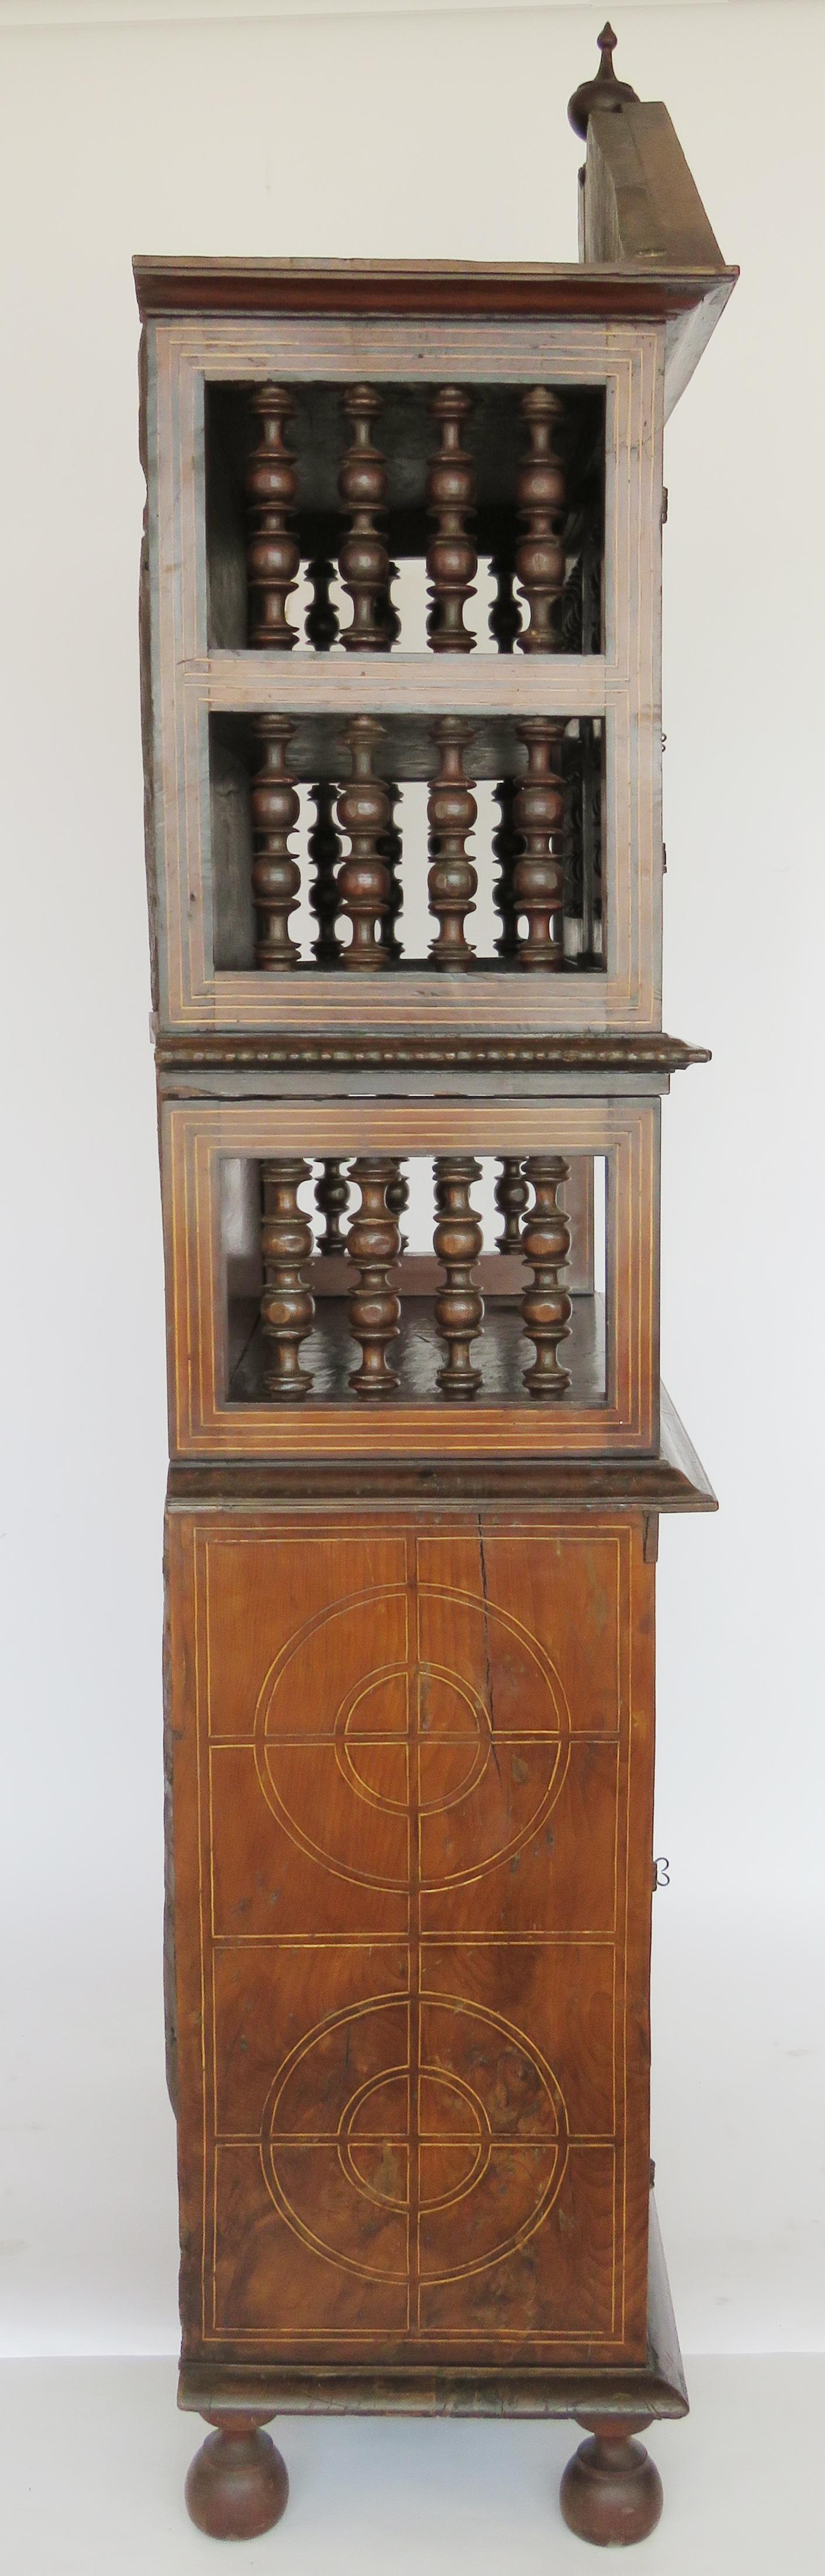 Inlay 18th Century Baroque Spindle Inlaid Walnut Cabinet For Sale